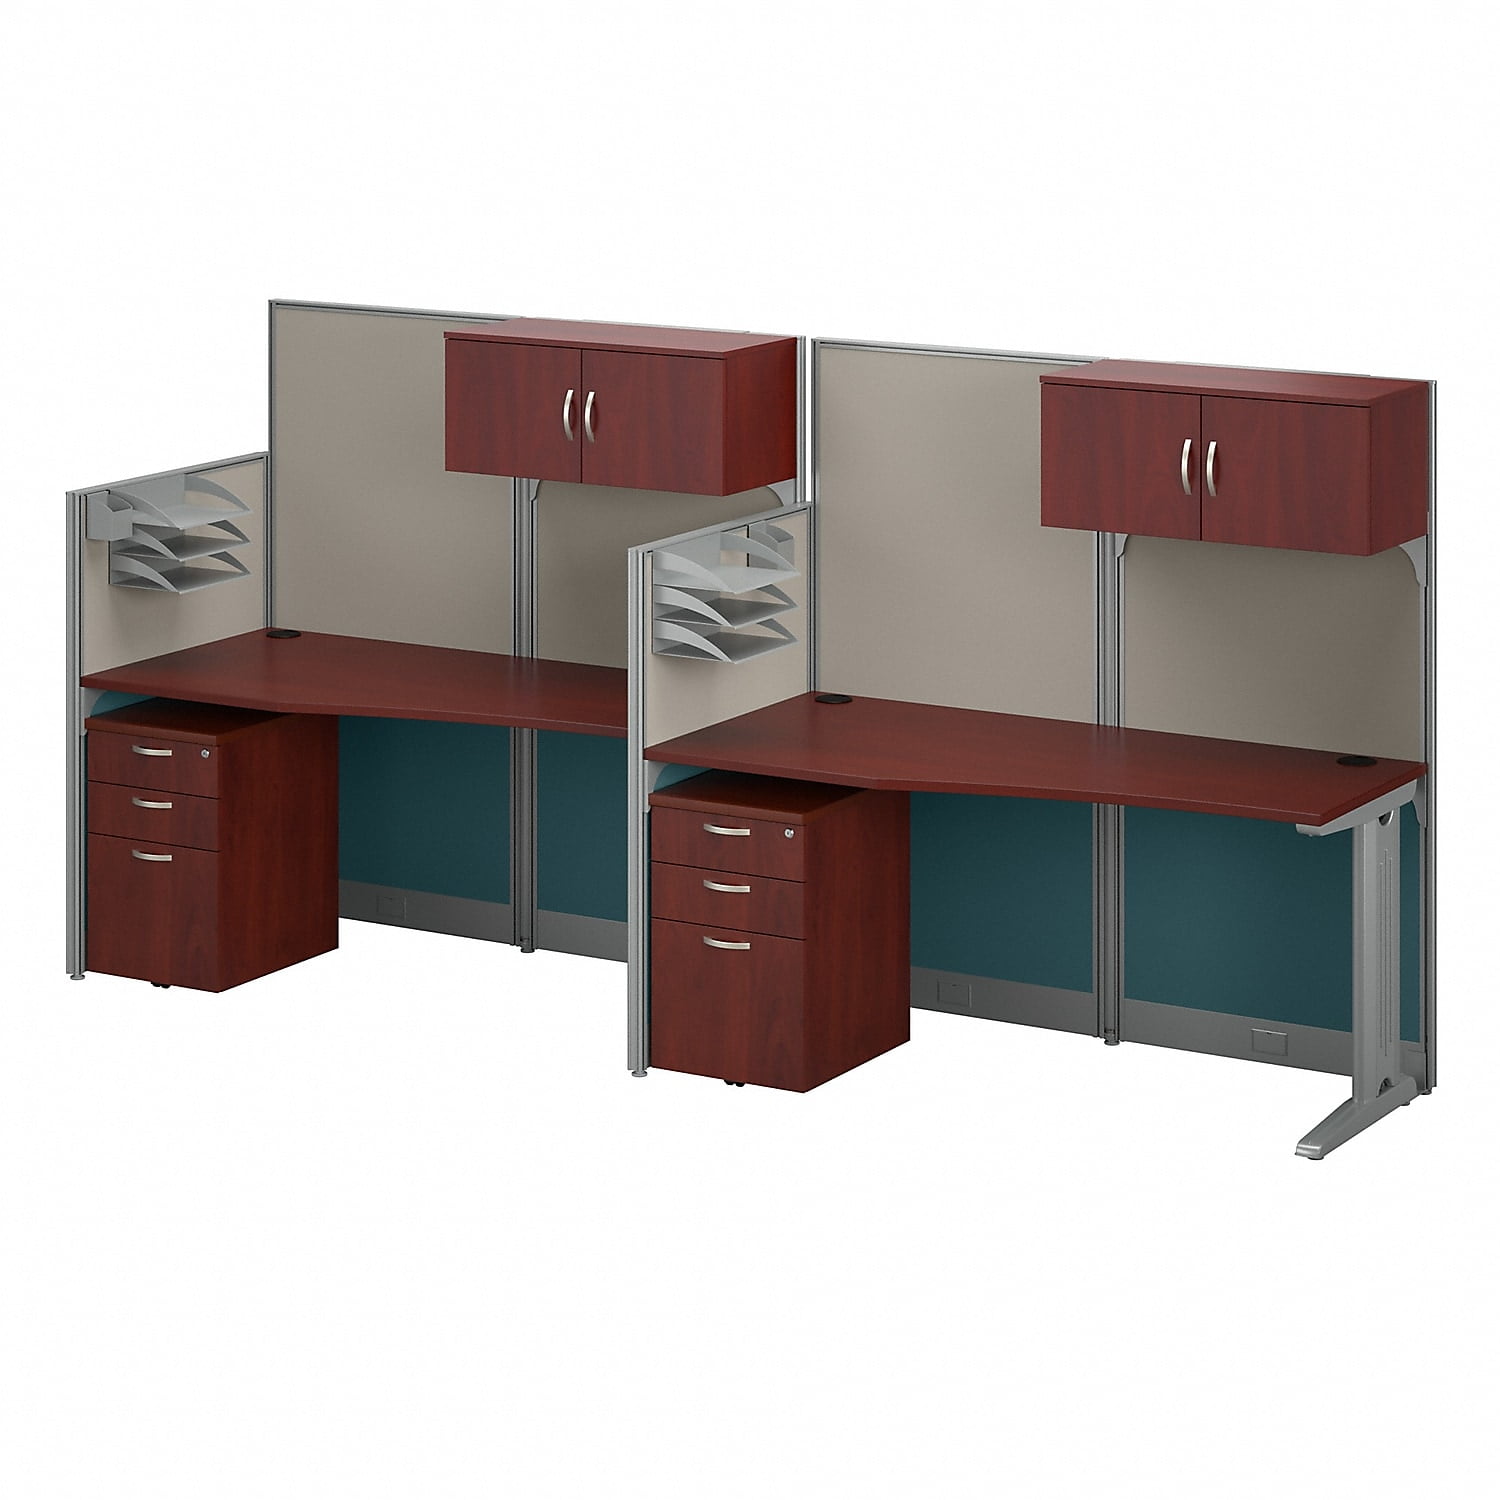 Oiah005hc Office In An Hour 2 Person Cubicle Workstations - Hansen Cherry